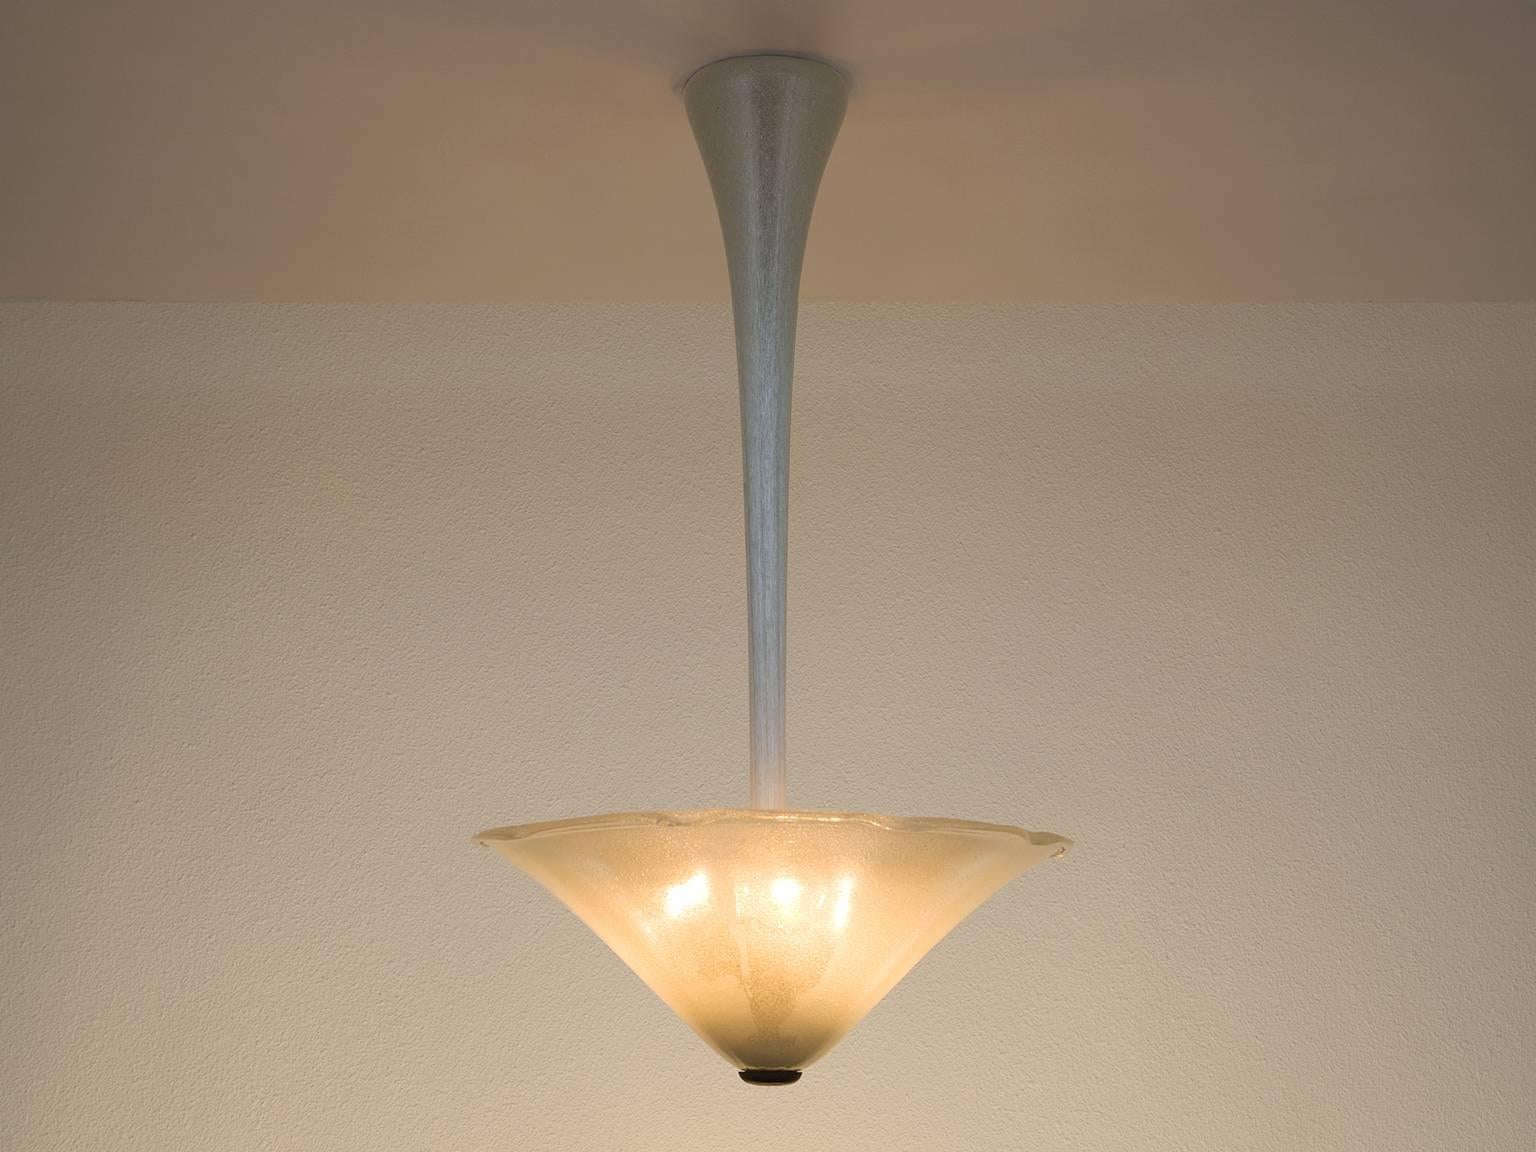 Pendant, Pulegoso glass, Italy, 1950s.

The organic, delicate shape of this chandelier resembles that of a flower or mushroom. Dropping from the sealing like a stem, the shade of the pendant shows an upward rise and fans out in a soft, natural way.